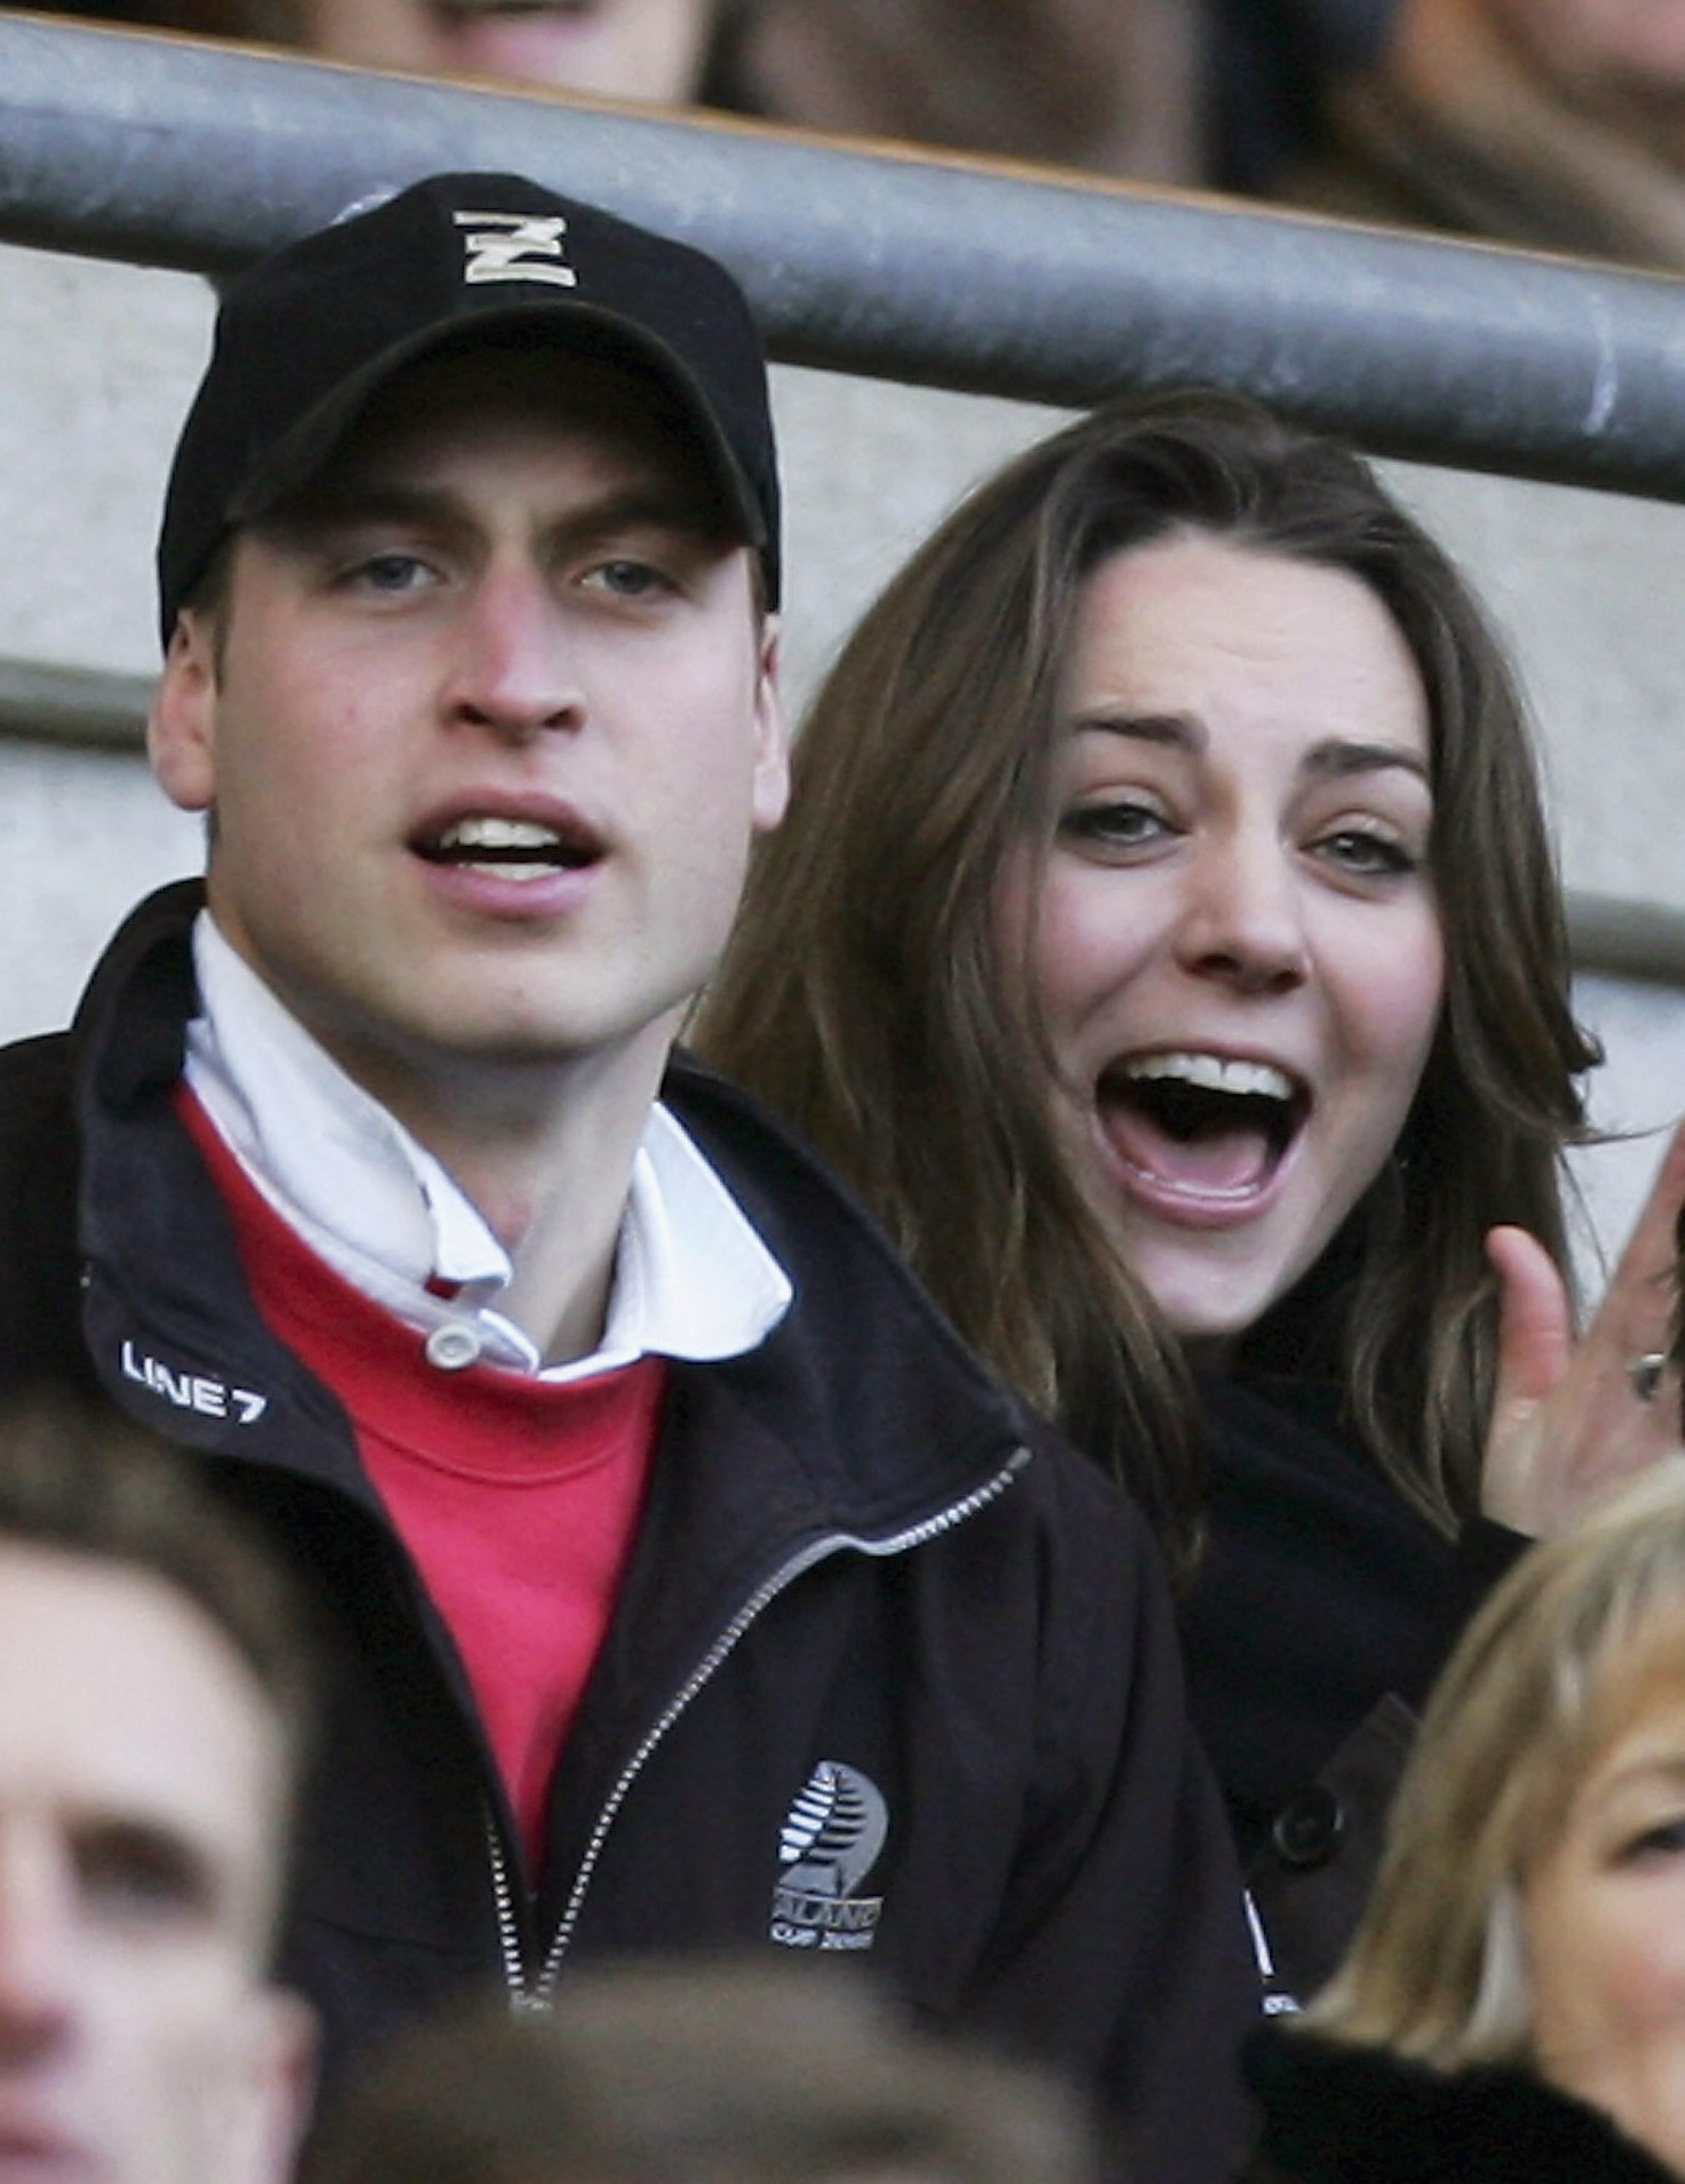 Prince William and Kate Middleton cheer on the English team during the RBS Six Nations Championship match between England and Italy at Twickenham on February 10, 2007 in London, England